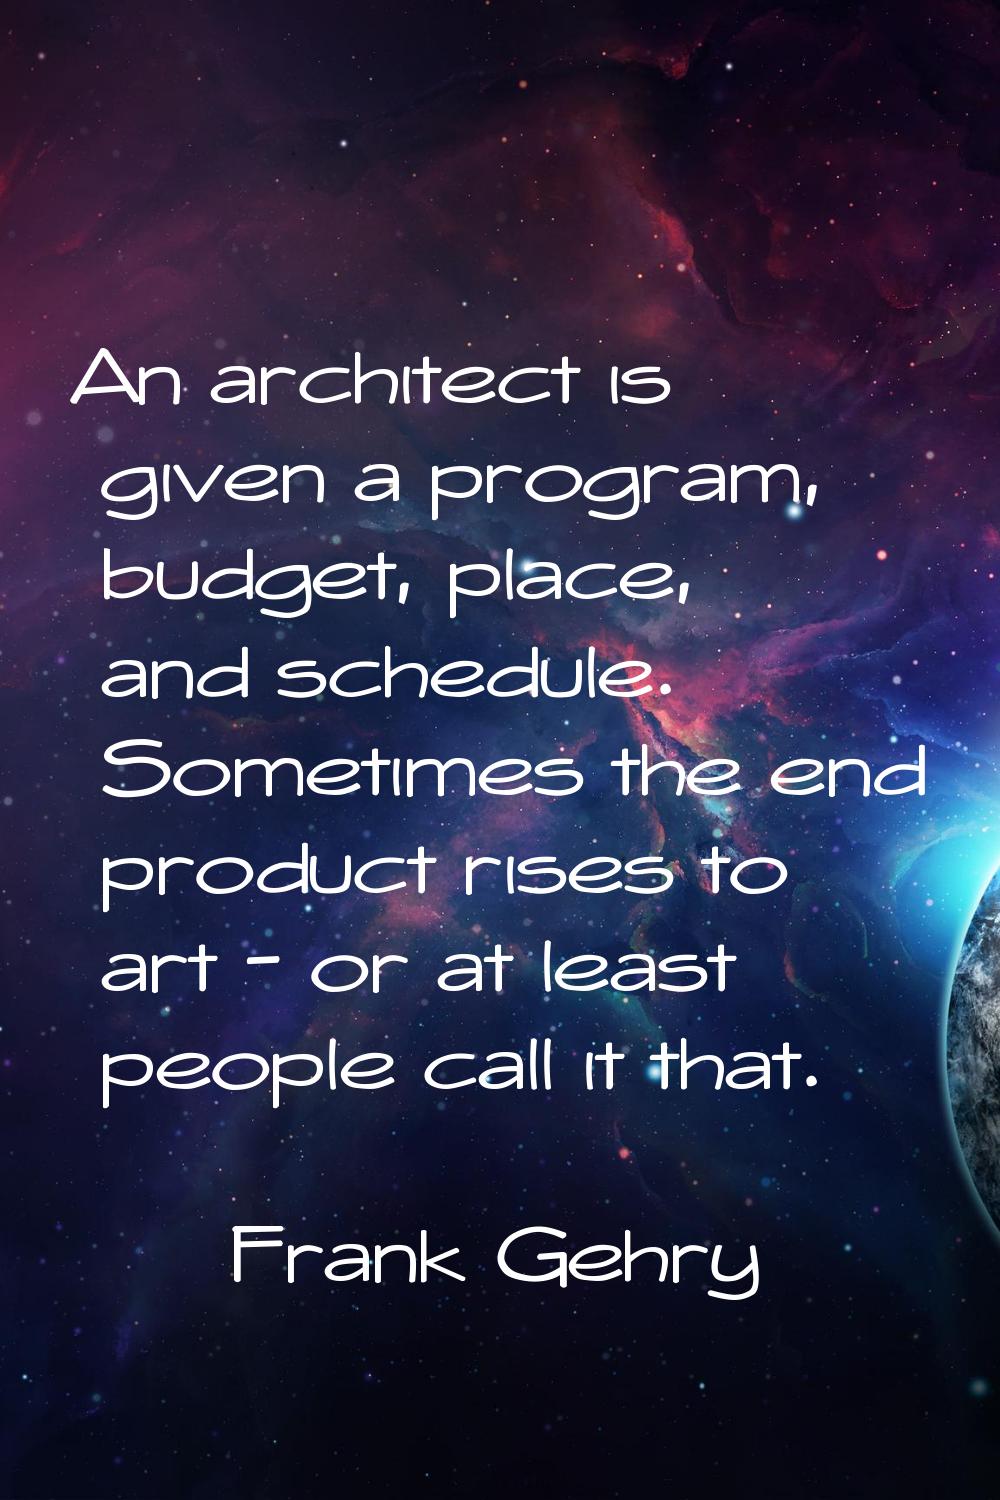 An architect is given a program, budget, place, and schedule. Sometimes the end product rises to ar